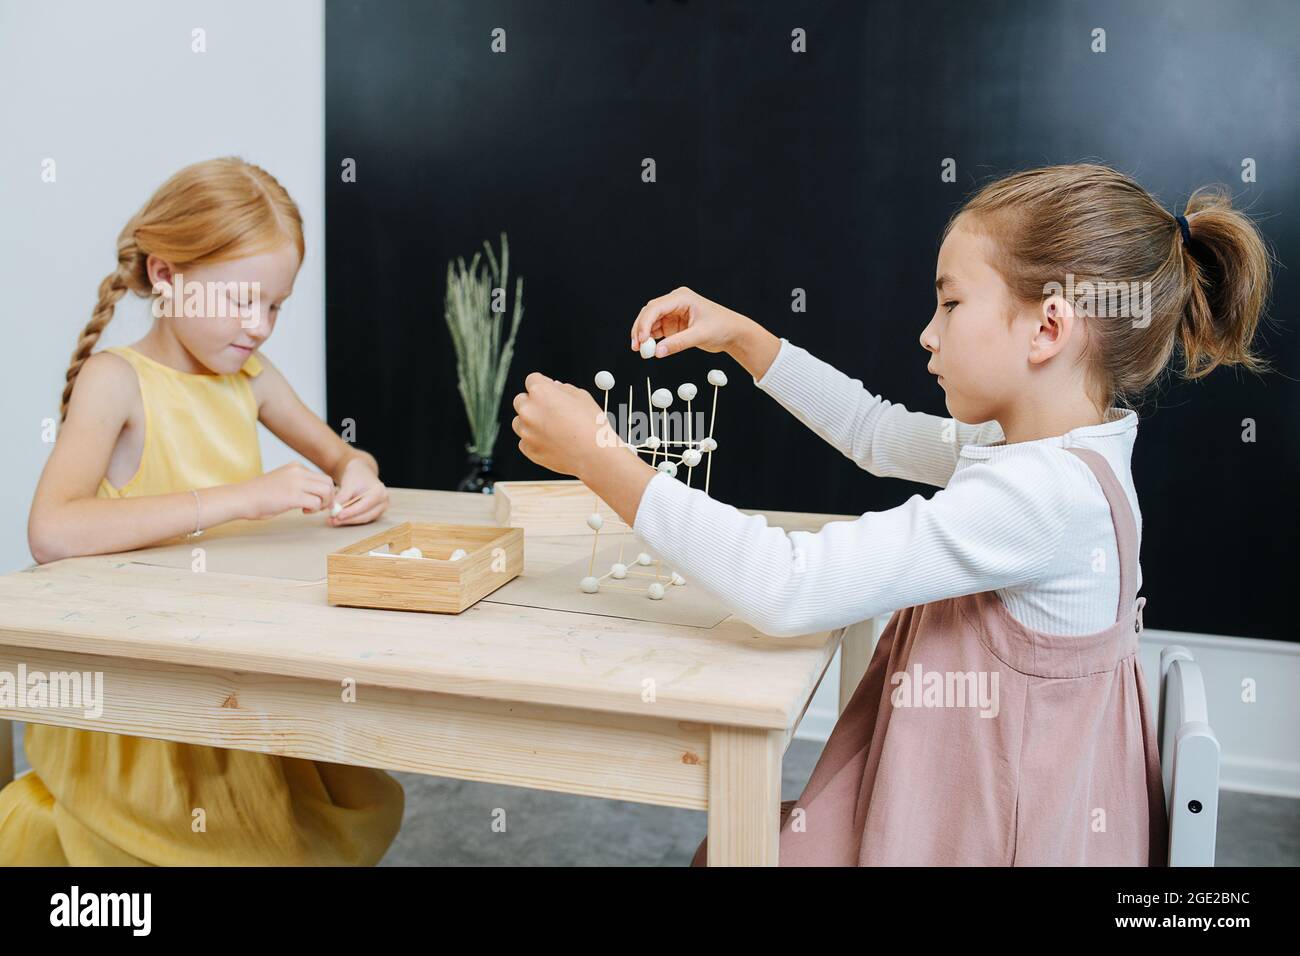 Immersed girls are busy building 3d shapes from plasticine and toothpicks Stock Photo